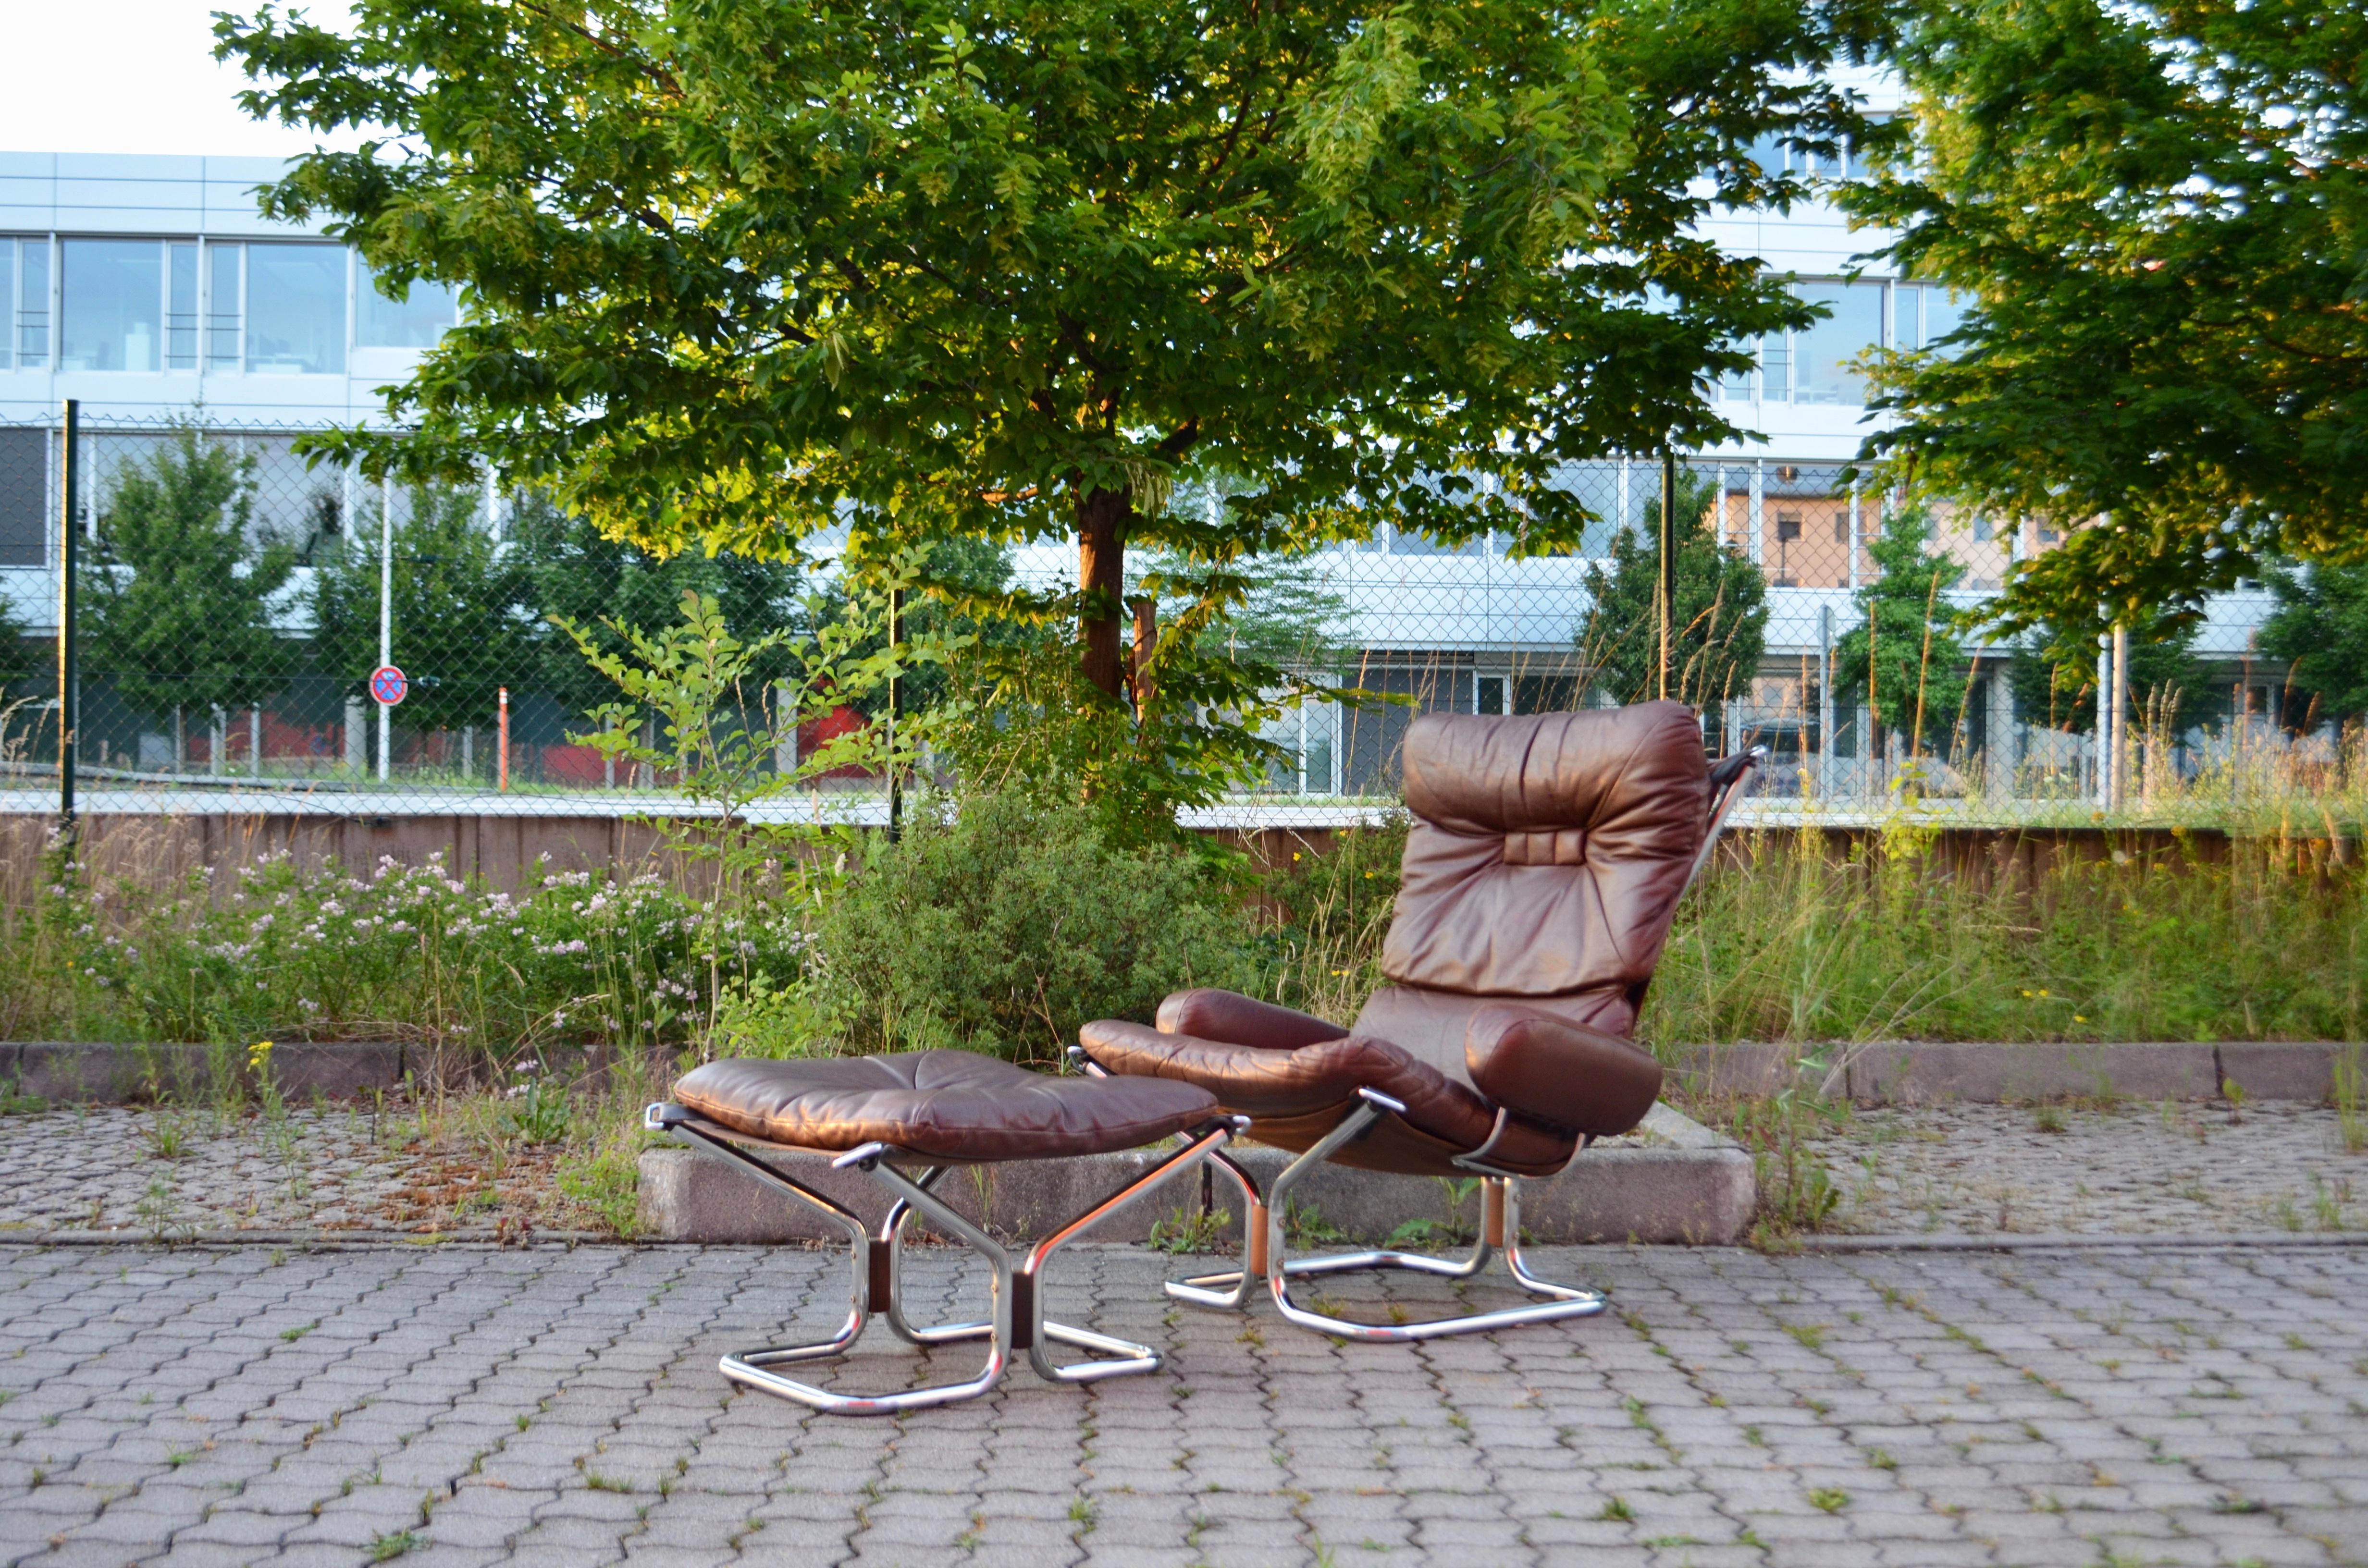 This 'Wing Wingback lounge chair and ottomane were designed by Harald Relling and were produced by Westnofa in Norway.
They are made from brown aniline leather on chromed tubular steel frame and canvas.
The loose soft pad cushions reates a